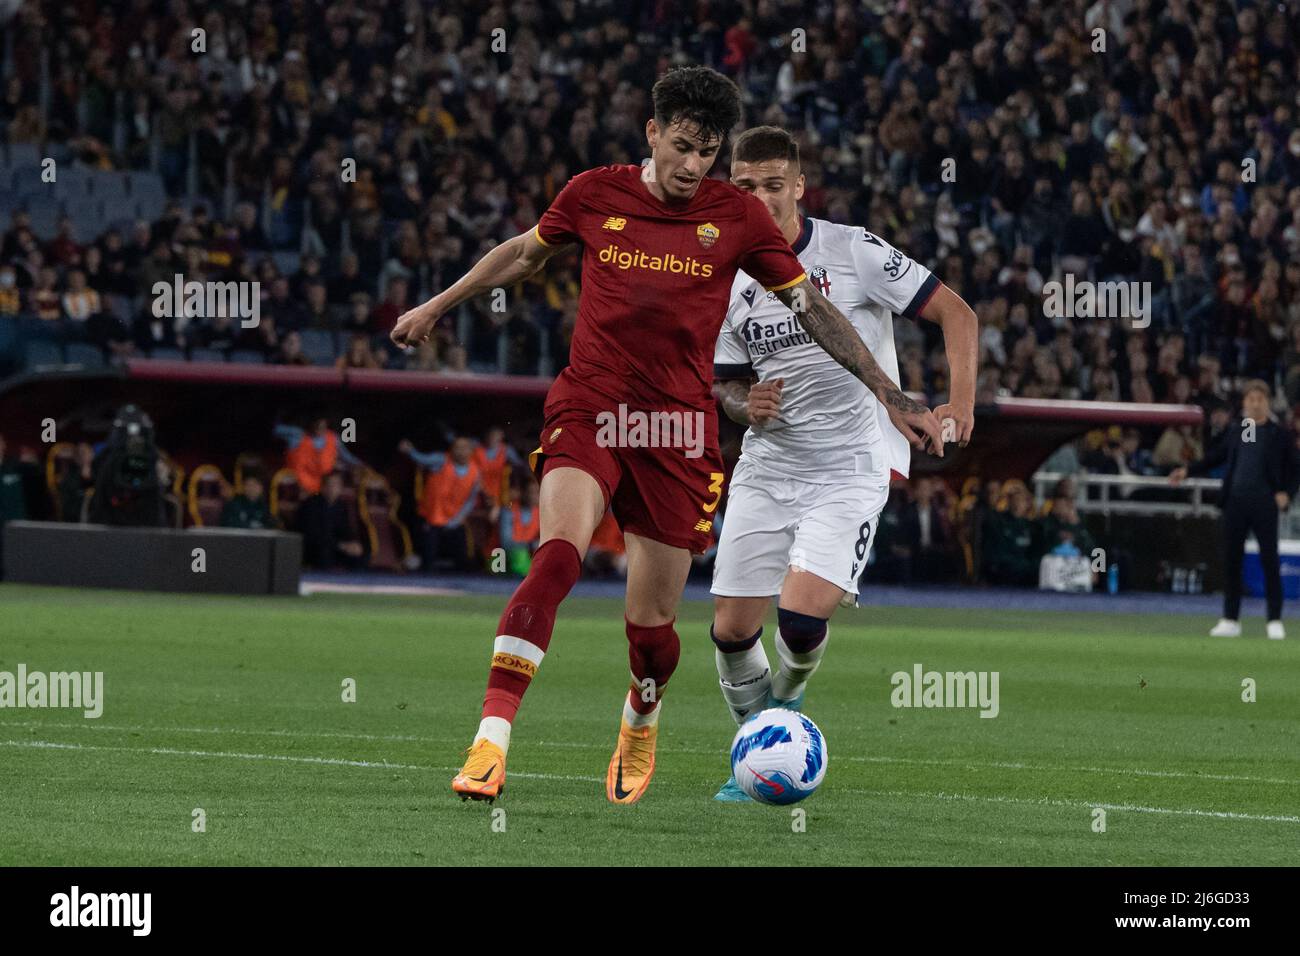 Rome, Italy. 1 may, 2022. Roger Ibanez da Silva of AS Roma looks on during the Serie A match between Roma and Bologna at Stadio Olimpico. Cosimo Martemucci / Alamy Live News Stock Photo